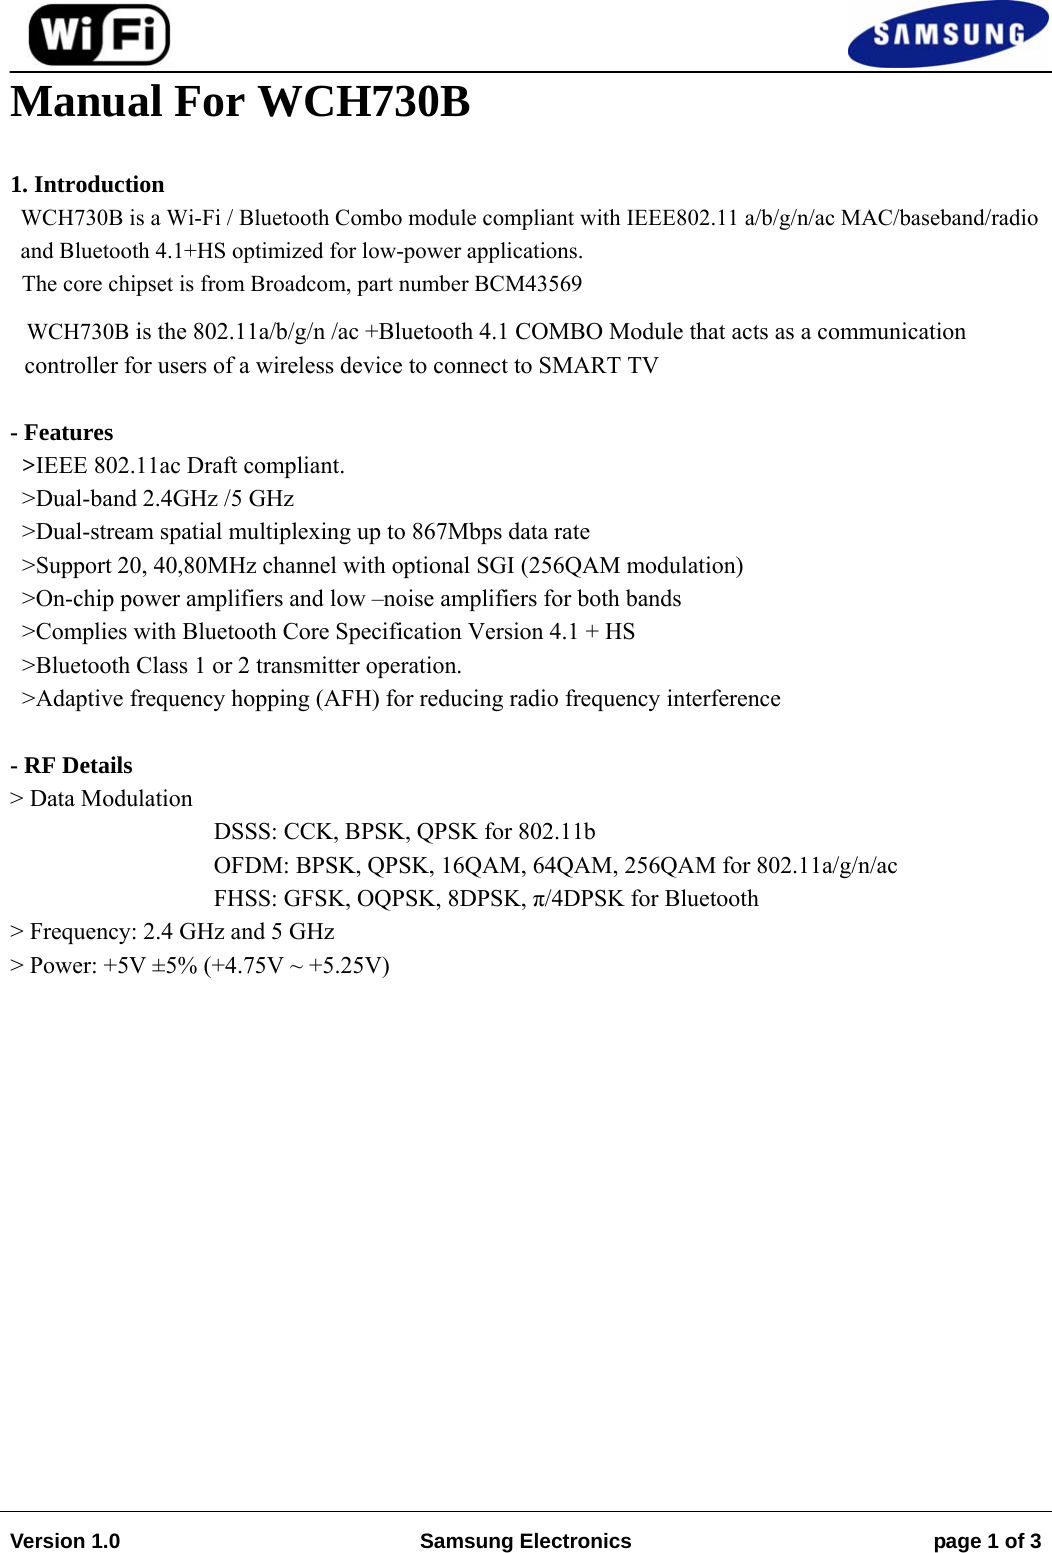                                                                                                                                         Version 1.0  Samsung Electronics  page 1 of 3   Manual For WCH730B  1. Introduction WCH730B is a Wi-Fi / Bluetooth Combo module compliant with IEEE802.11 a/b/g/n/ac MAC/baseband/radio and Bluetooth 4.1+HS optimized for low-power applications.   The core chipset is from Broadcom, part number BCM43569   WCH730B is the 802.11a/b/g/n /ac +Bluetooth 4.1 COMBO Module that acts as a communication controller for users of a wireless device to connect to SMART TV  - Features   &gt;IEEE 802.11ac Draft compliant. &gt;Dual-band 2.4GHz /5 GHz &gt;Dual-stream spatial multiplexing up to 867Mbps data rate &gt;Support 20, 40,80MHz channel with optional SGI (256QAM modulation) &gt;On-chip power amplifiers and low –noise amplifiers for both bands &gt;Complies with Bluetooth Core Specification Version 4.1 + HS  &gt;Bluetooth Class 1 or 2 transmitter operation. &gt;Adaptive frequency hopping (AFH) for reducing radio frequency interference     - RF Details &gt; Data Modulation  DSSS: CCK, BPSK, QPSK for 802.11b OFDM: BPSK, QPSK, 16QAM, 64QAM, 256QAM for 802.11a/g/n/ac FHSS: GFSK, OQPSK, 8DPSK, π/4DPSK for Bluetooth  &gt; Frequency: 2.4 GHz and 5 GHz &gt; Power: +5V ±5% (+4.75V ~ +5.25V)